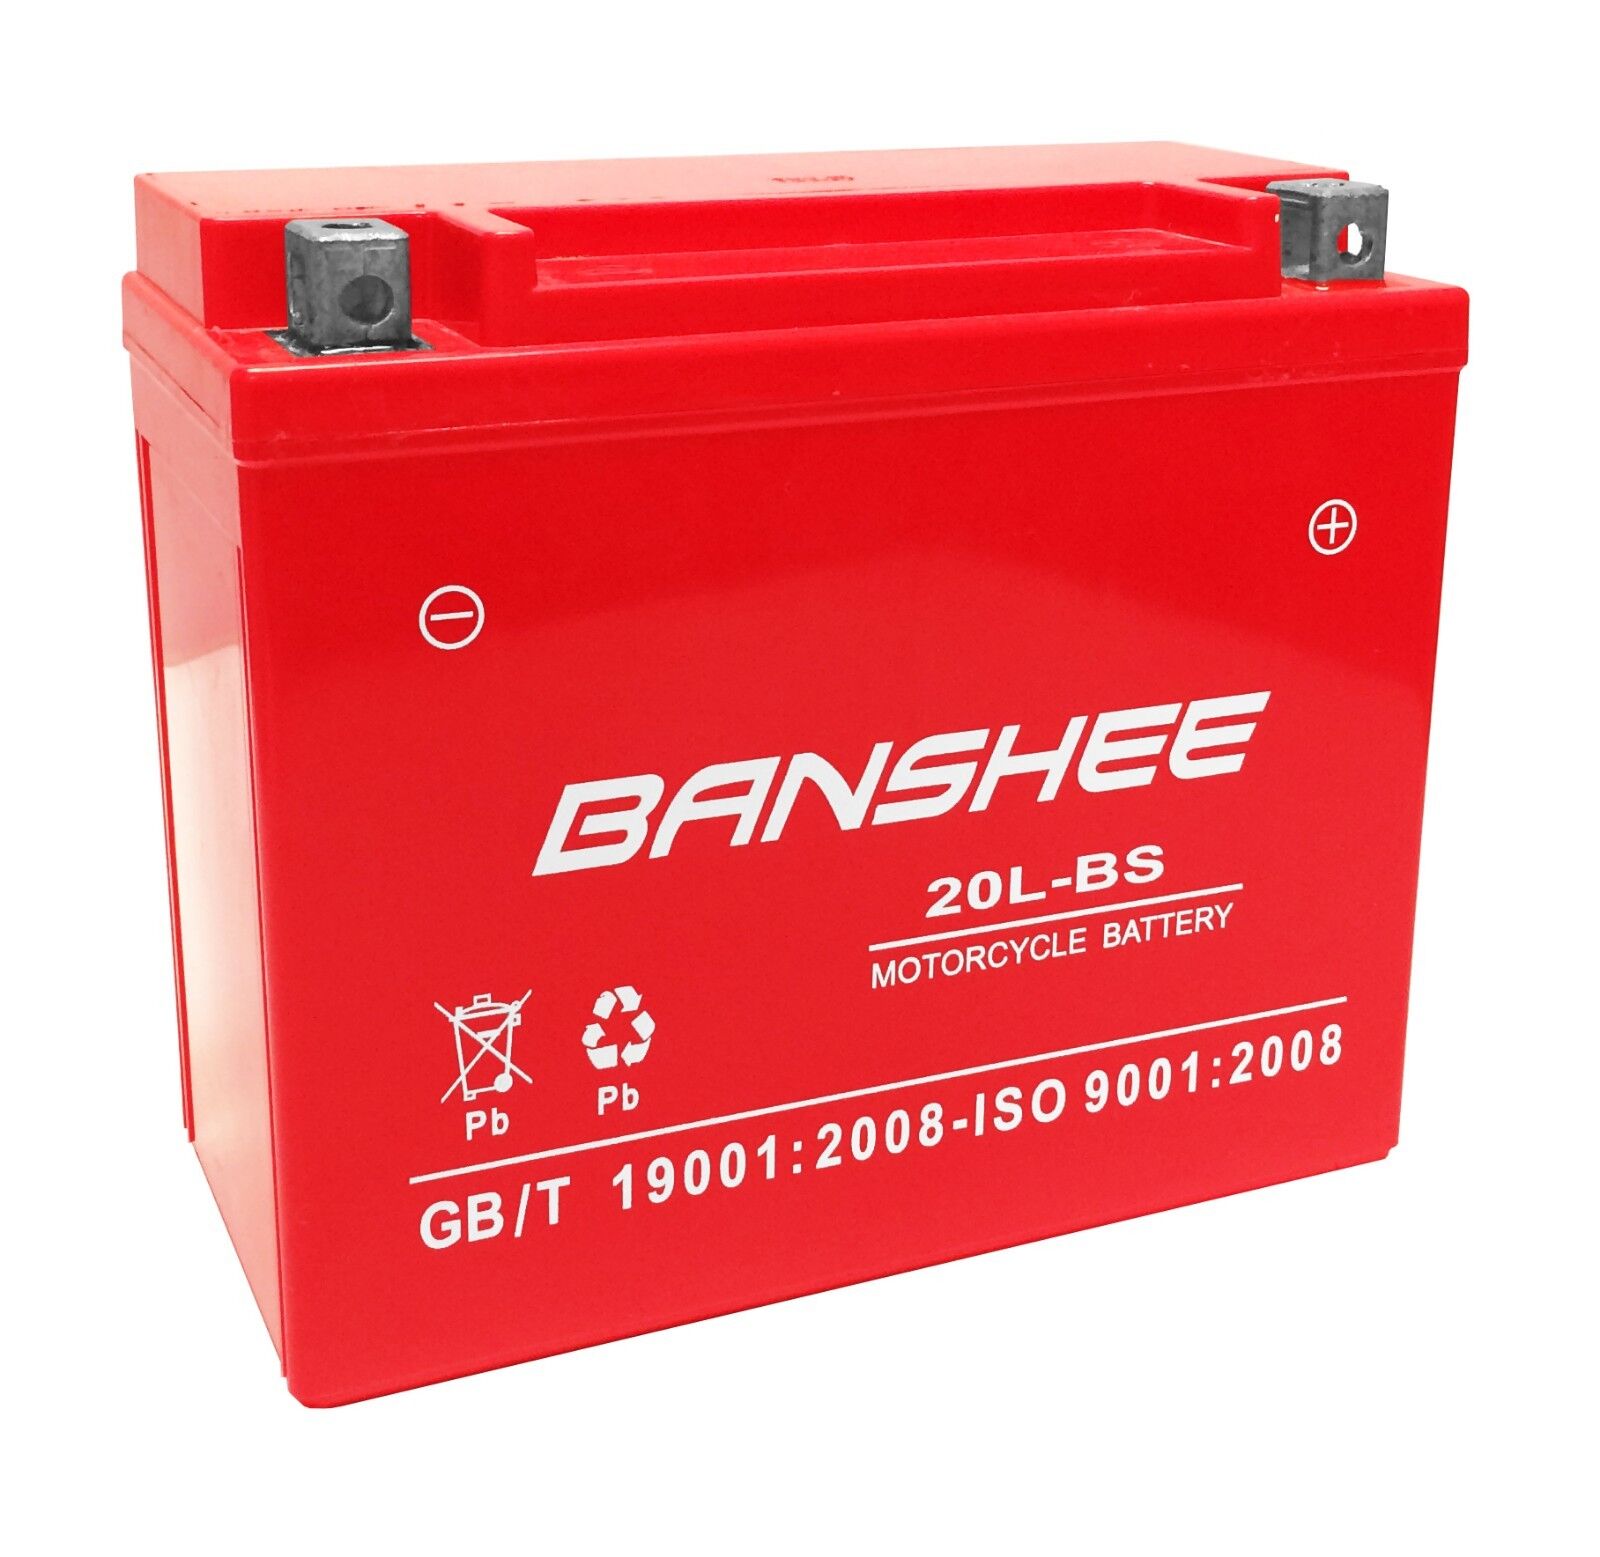 New Harley Davidson Motorcycle Replacement Banshee Battery, 4 Year Warranty